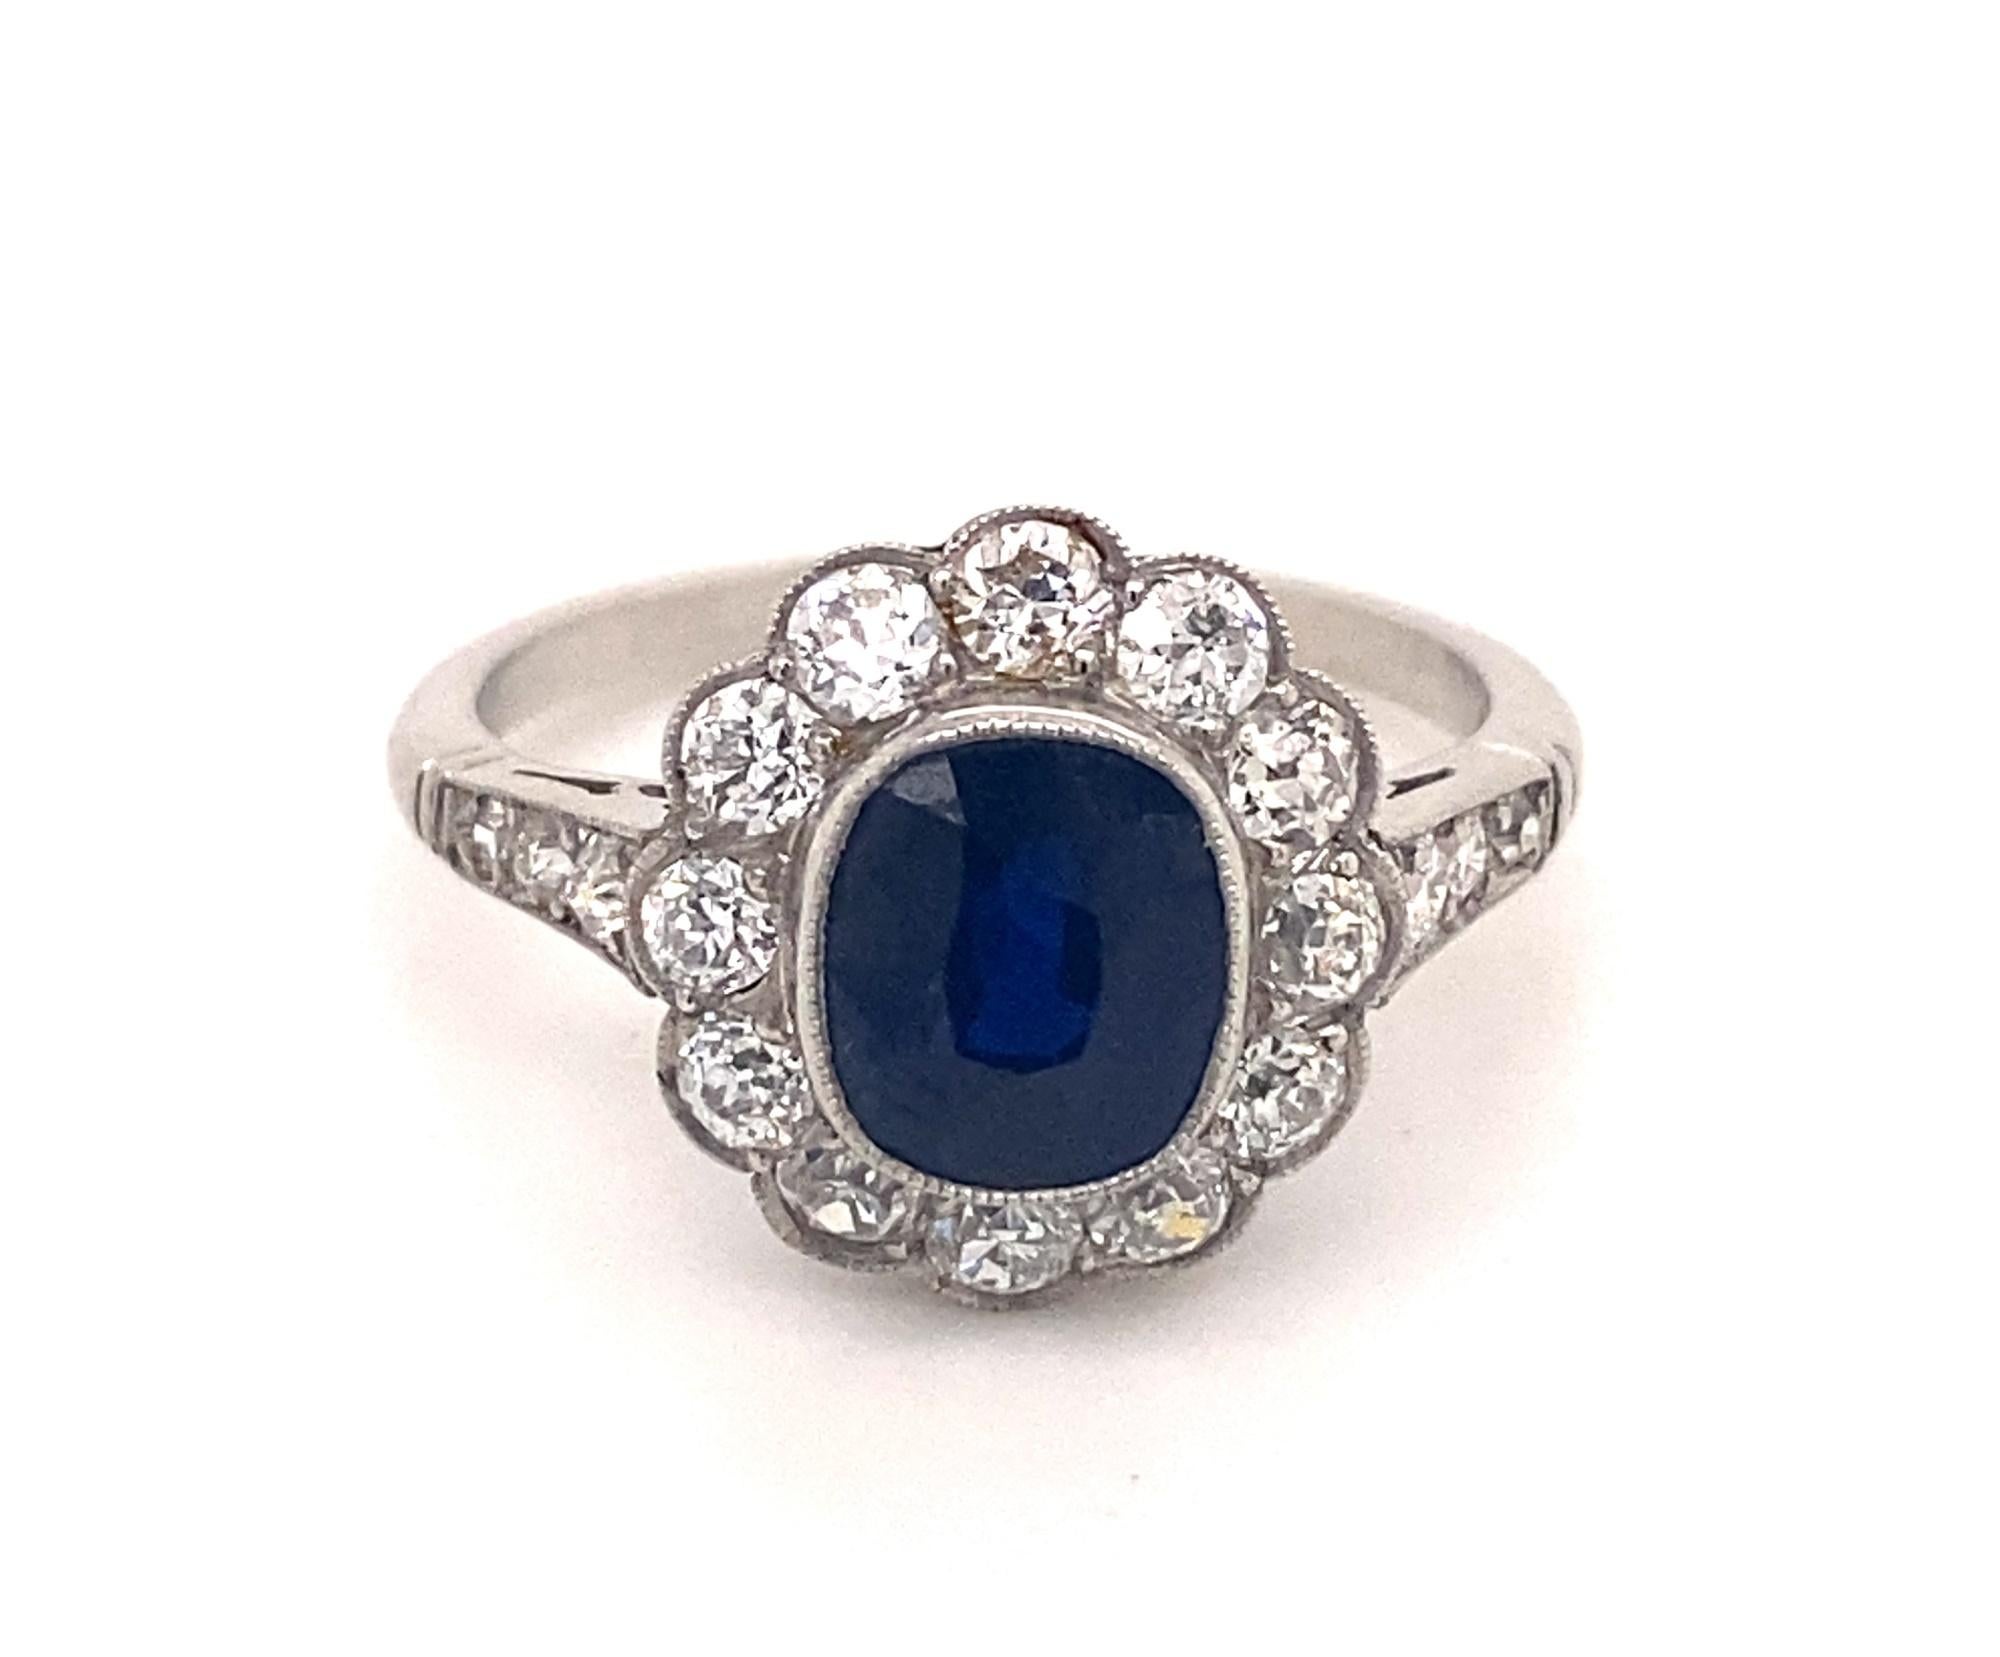 This is a beautiful vintage art deco style ring set with a 2.06 sapphire with a halo of diamonds in platinum.  The setting has an intricate filigree design in the gallery.  The sapphire is natural deep blue color with good clarity.  There are 18 old